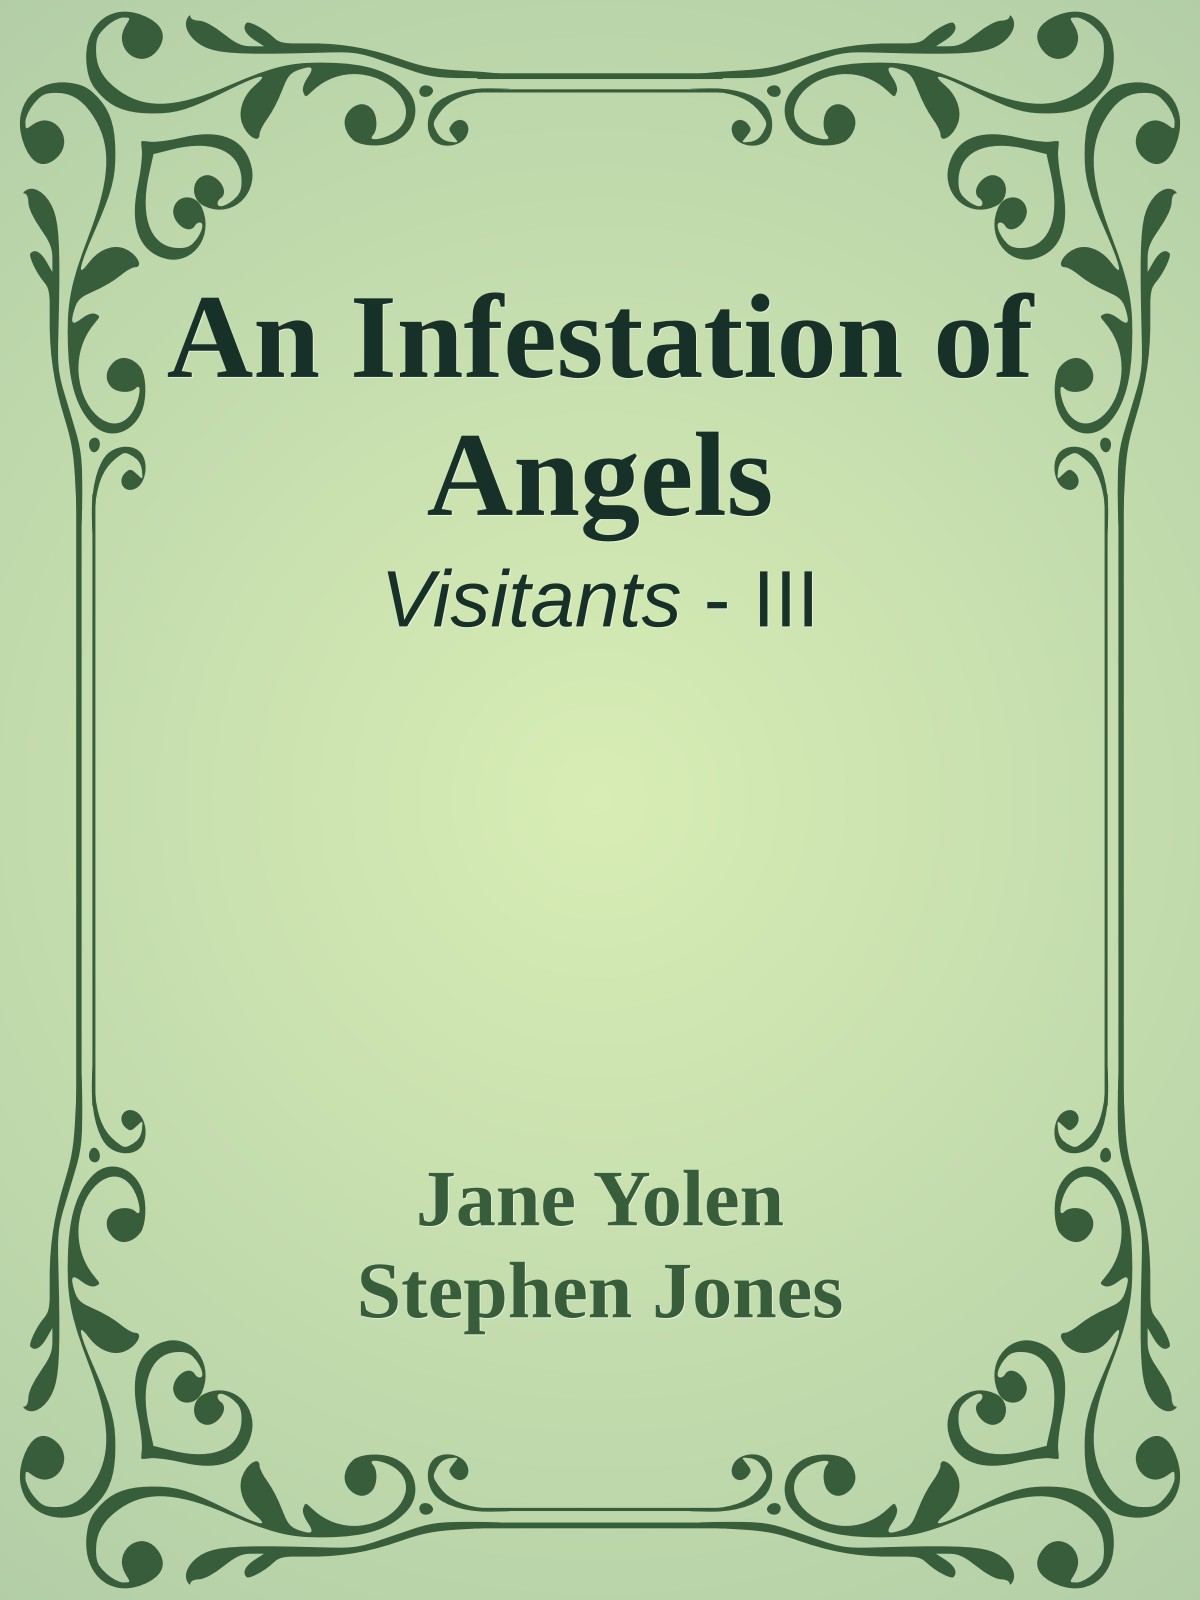 An Infestation of Angels